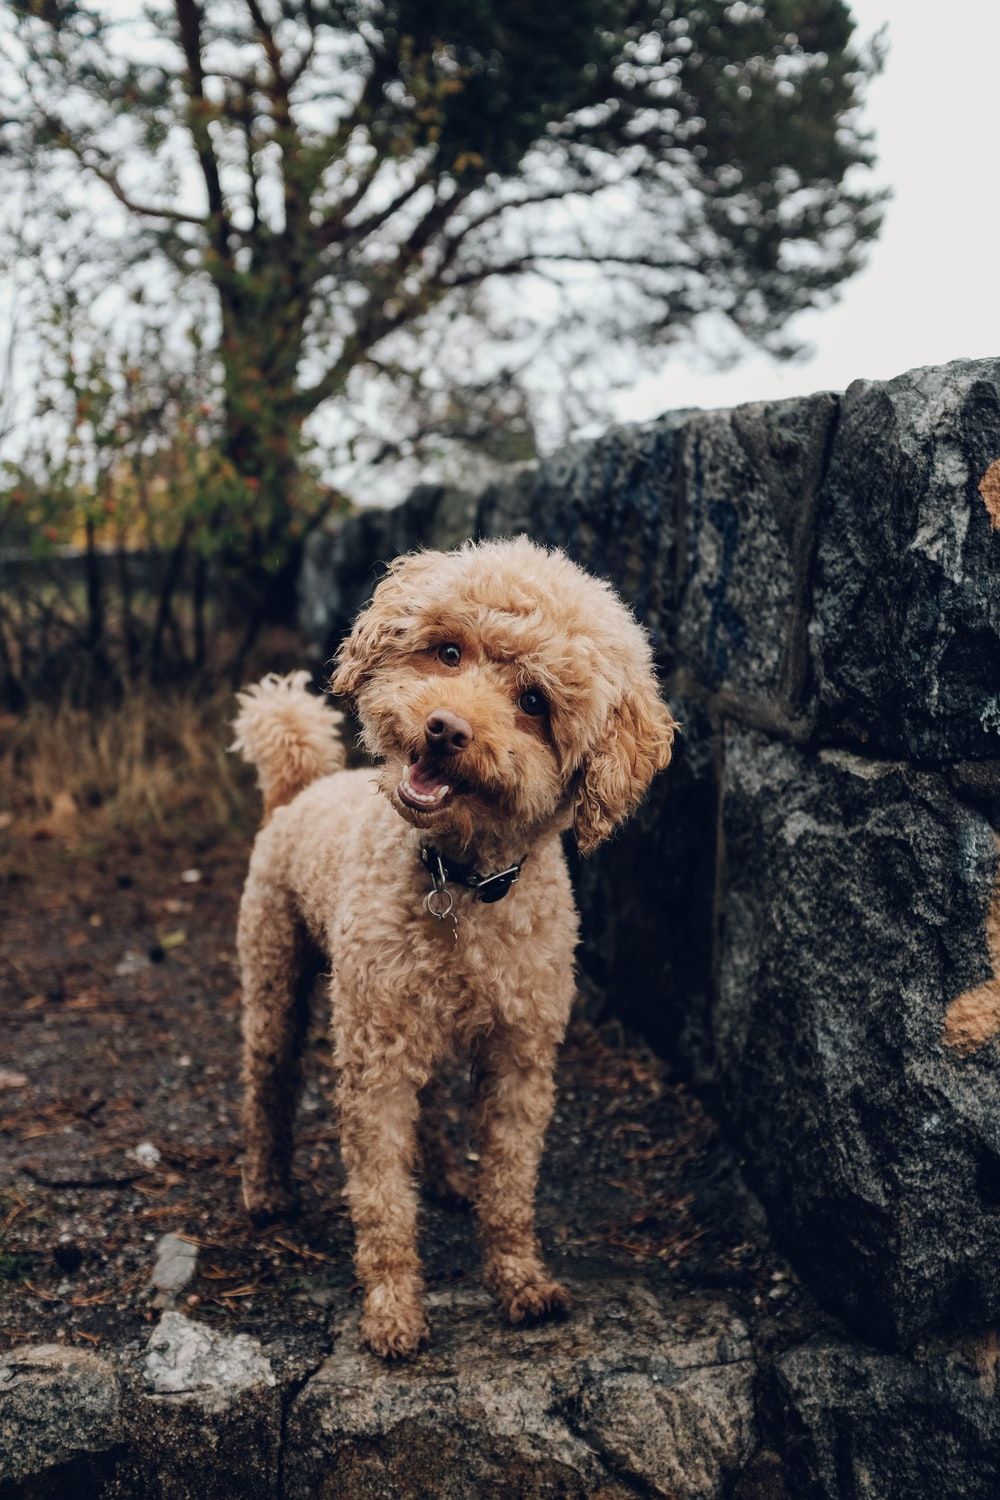 Poodle Picture. Download Free Image